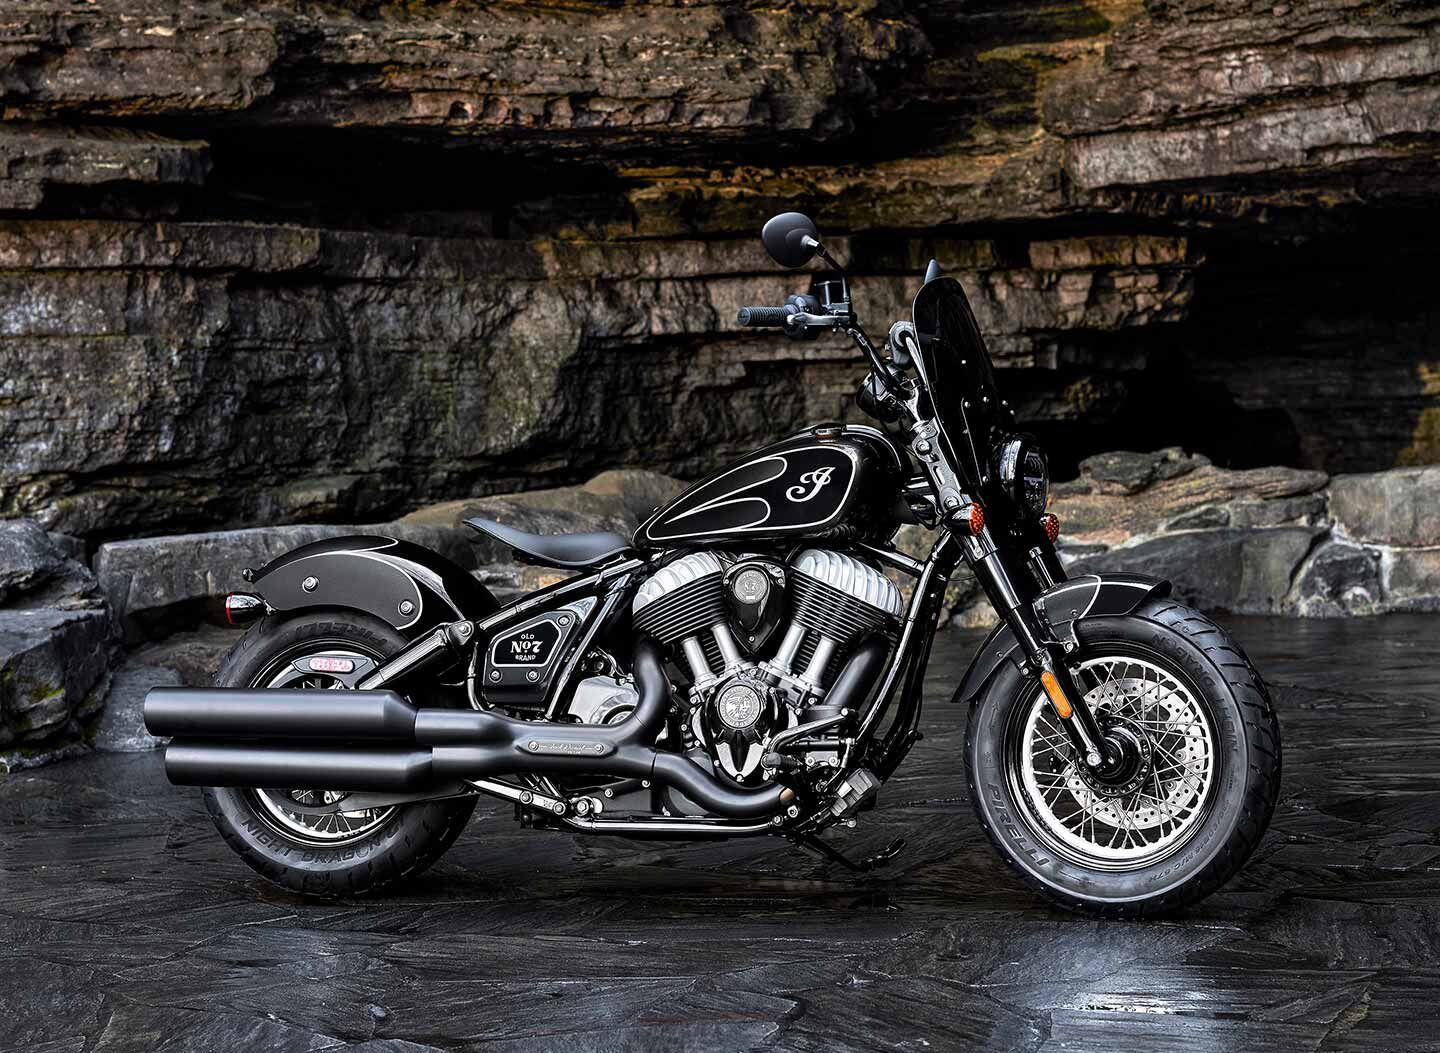 The Jack Daniel’s Limited Edition Indian Chief Bobber Dark Horse carries a price tag of $24,499 and will go on sale later in March.